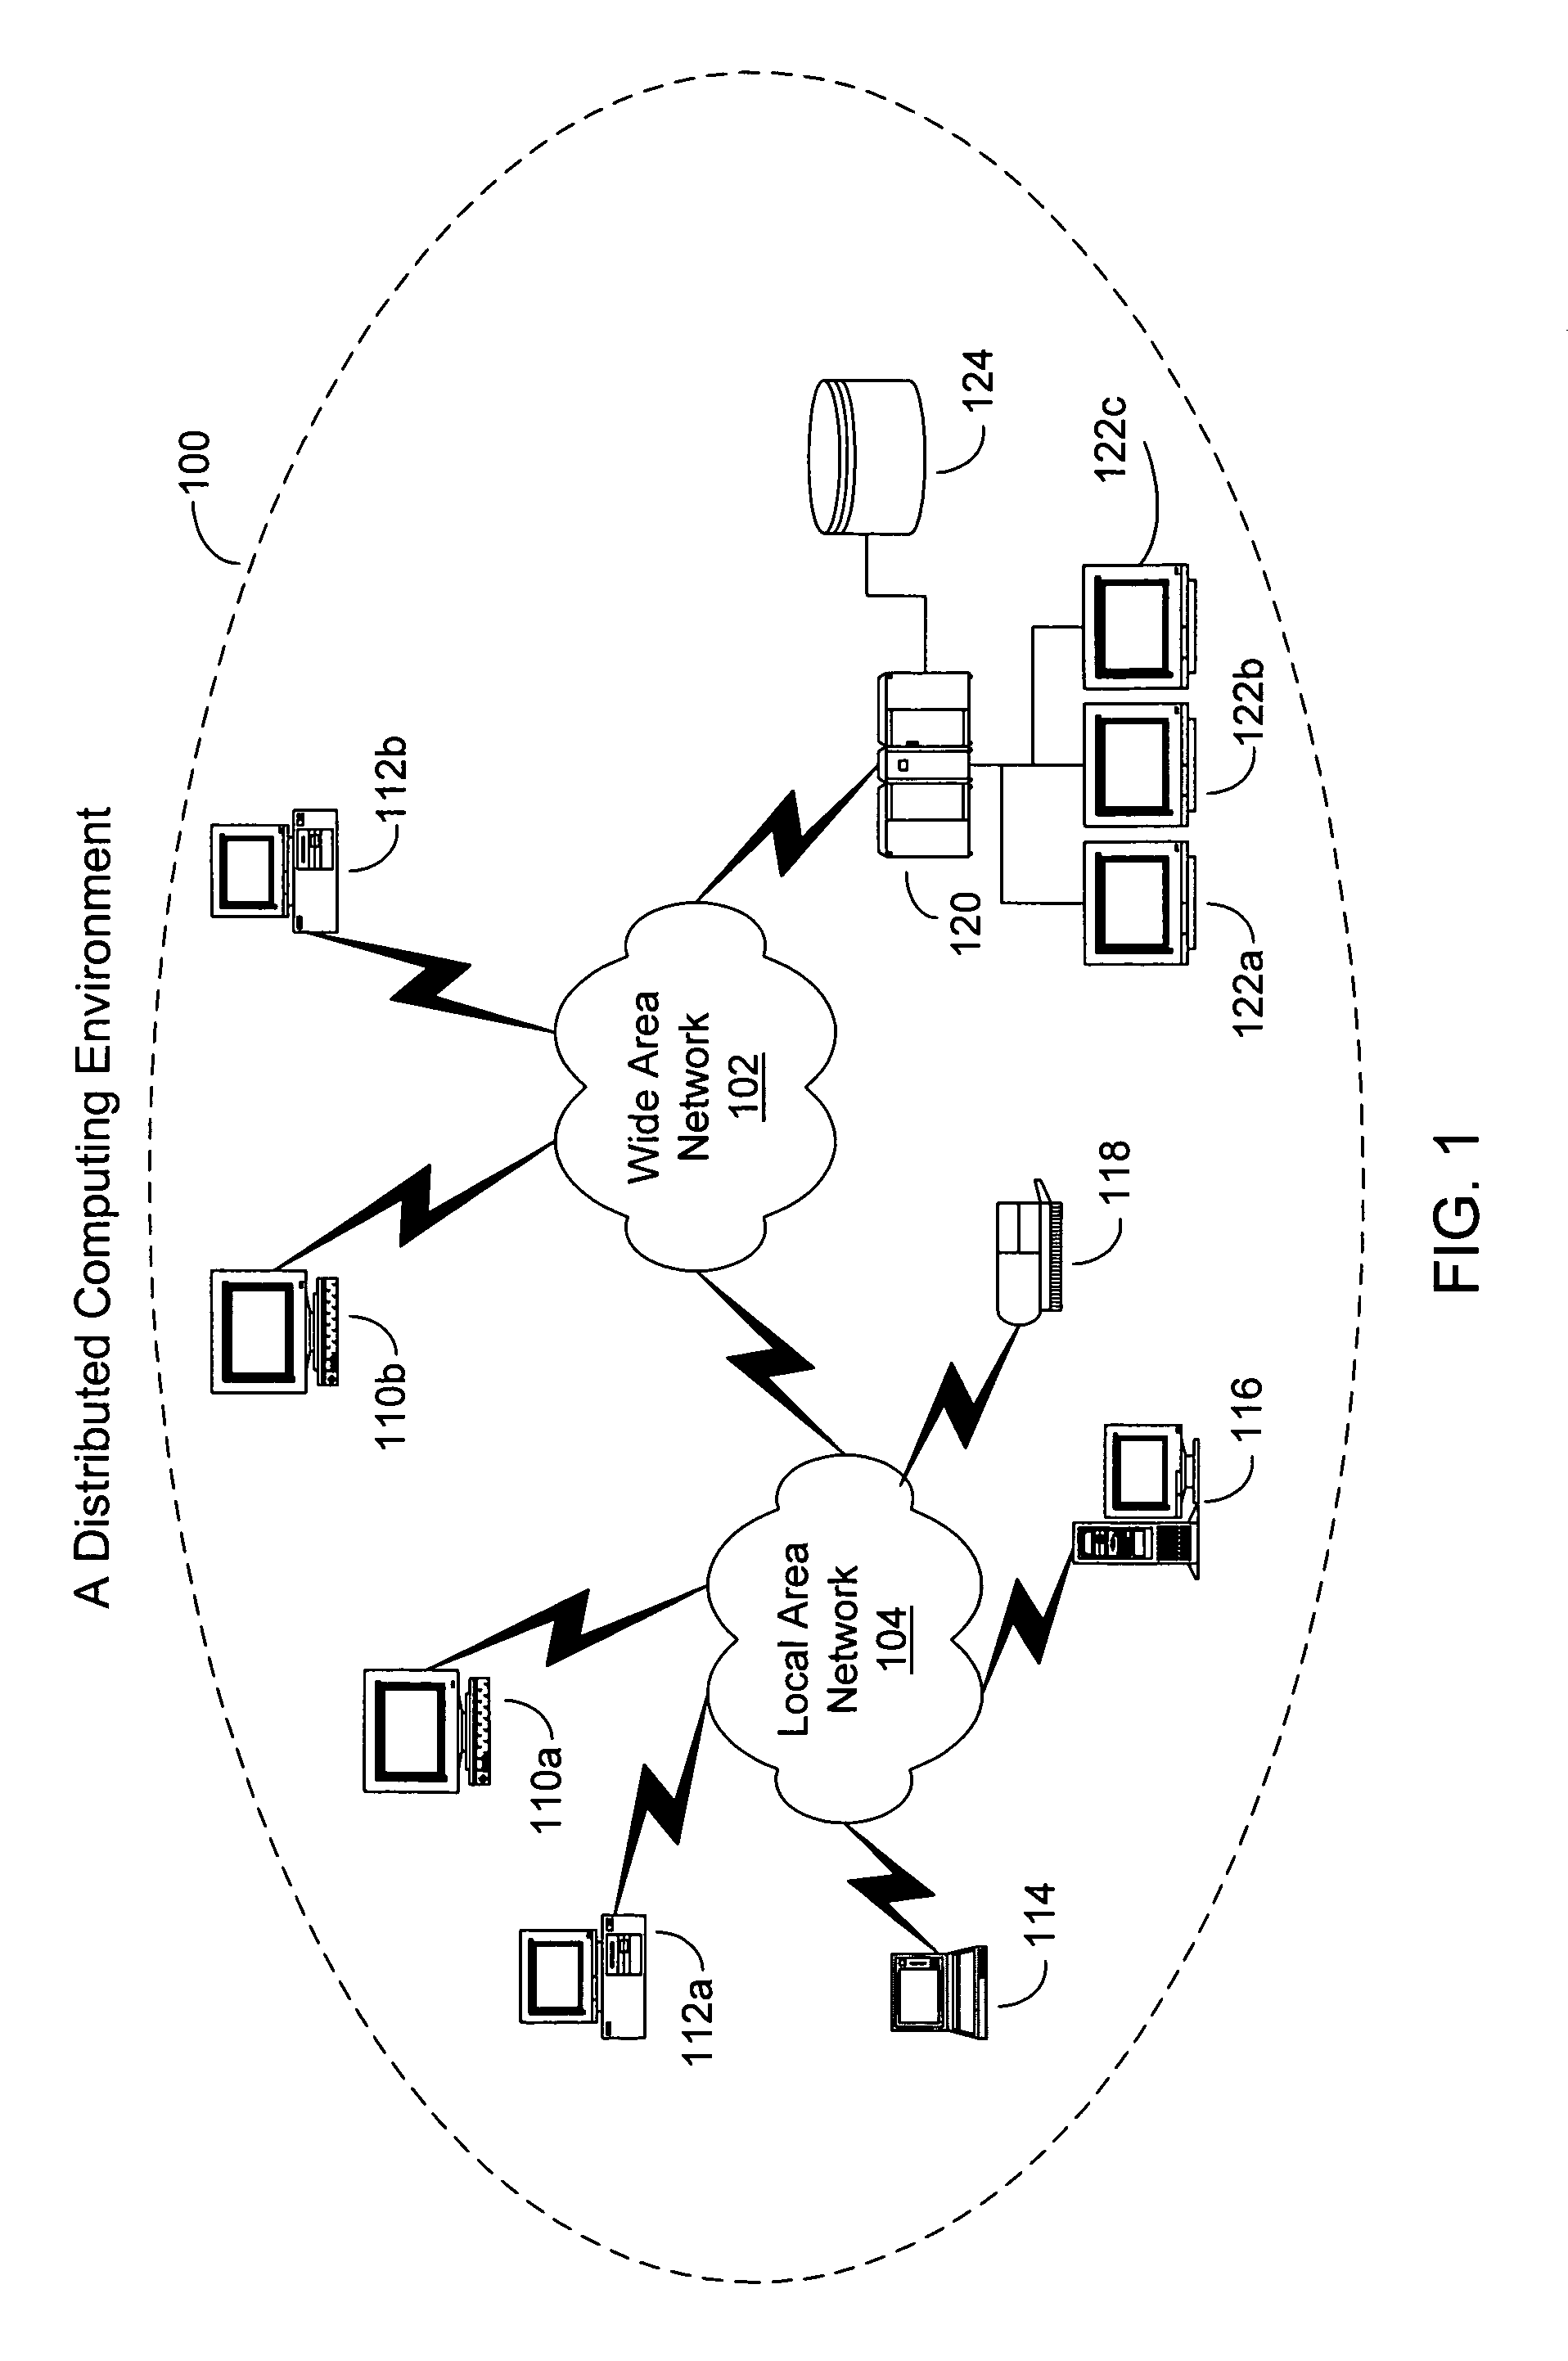 Event-triggered transaction processing for electronic data interchange